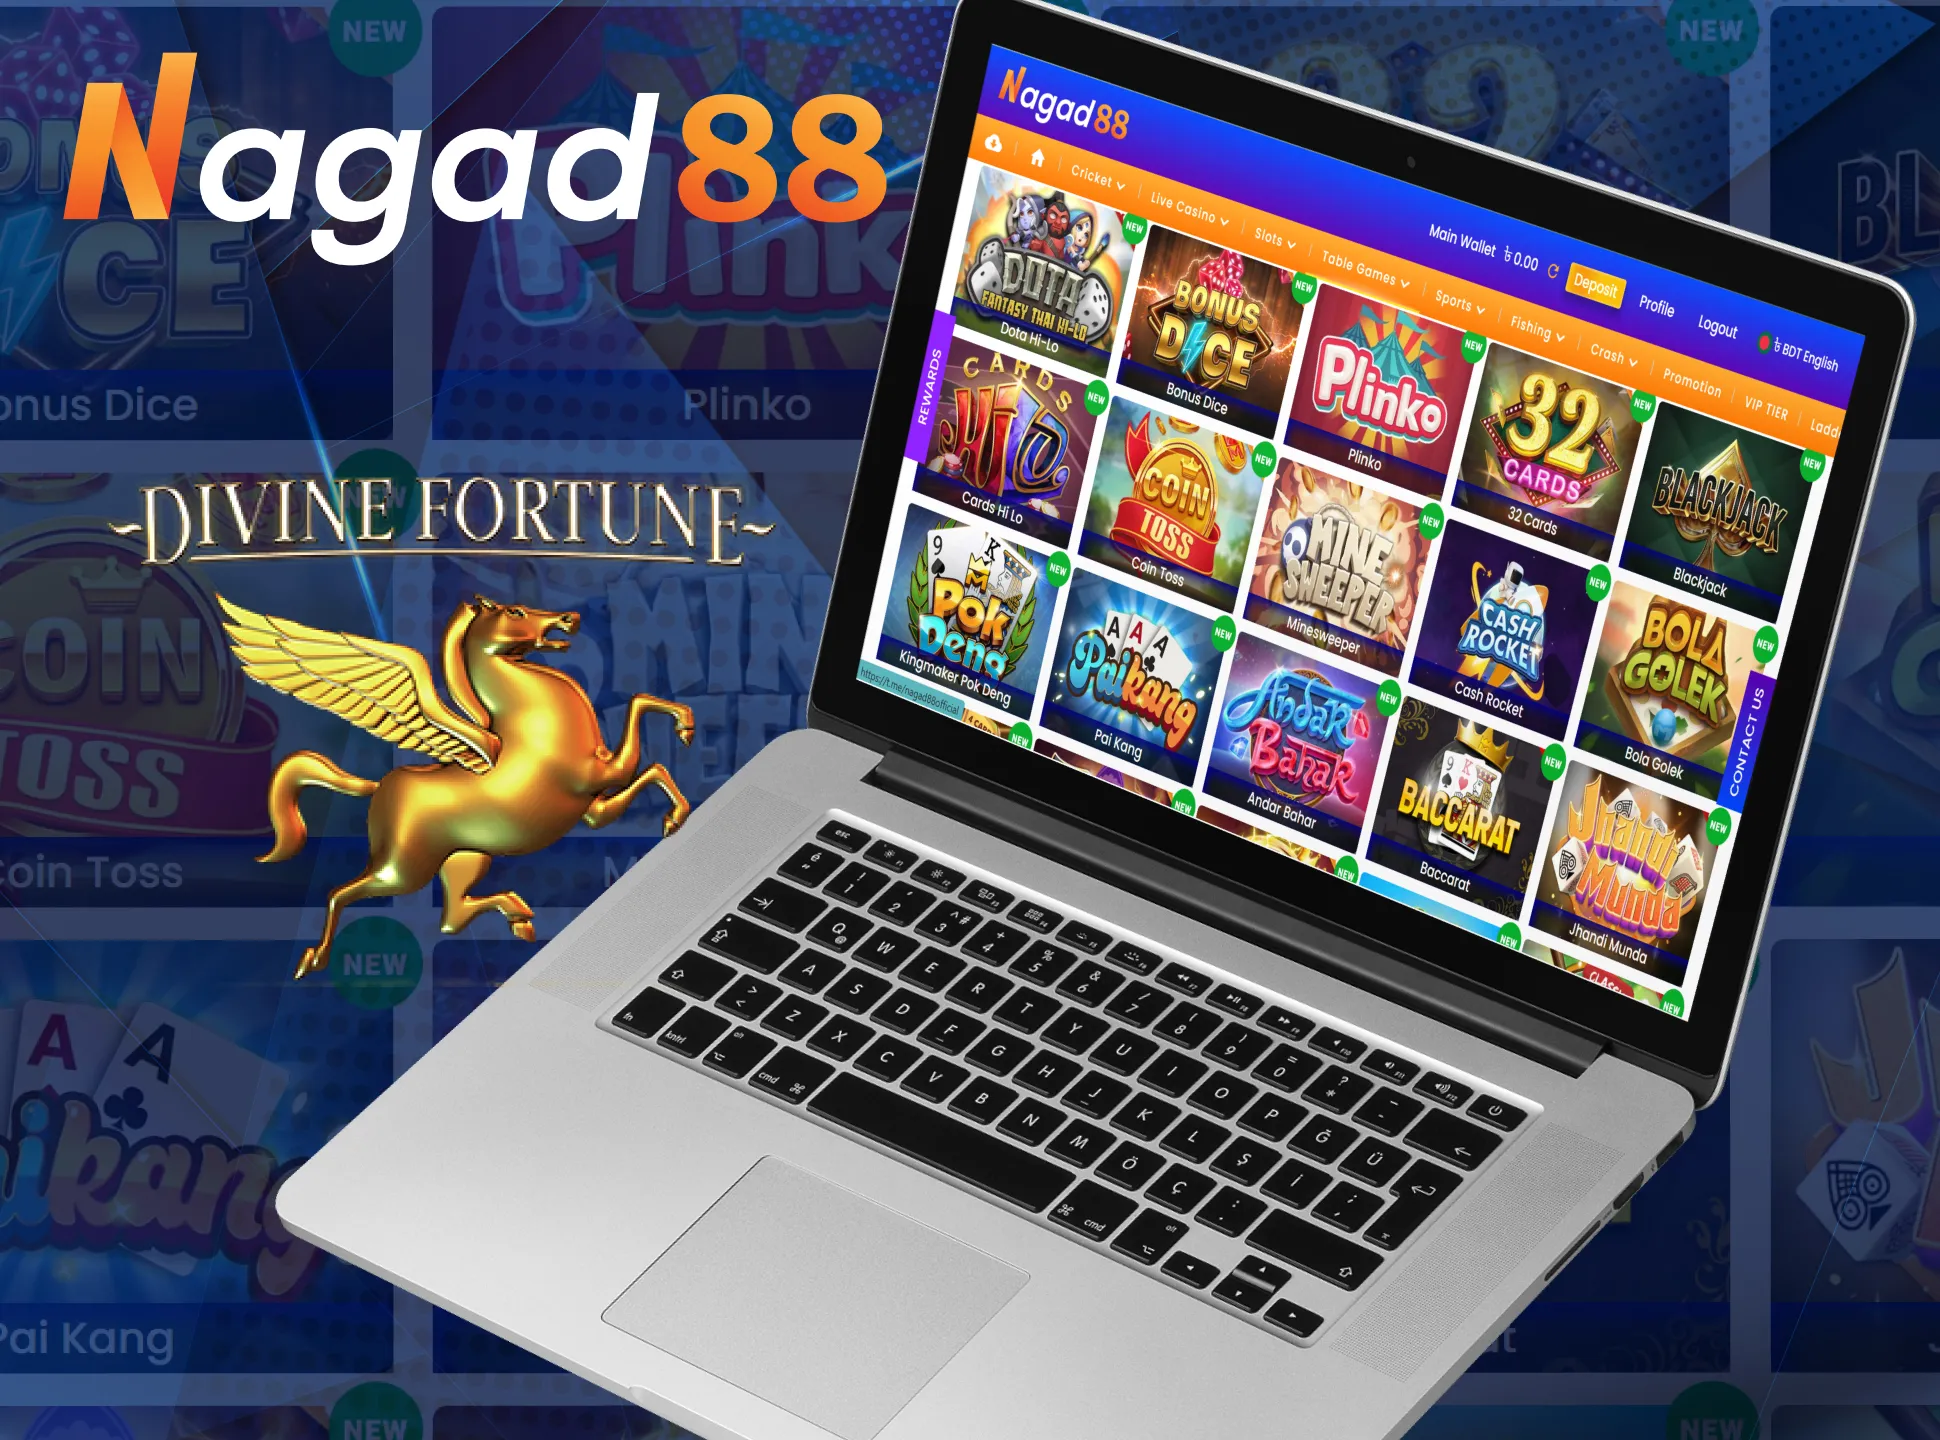 Play Divine fortune at Nagad88.